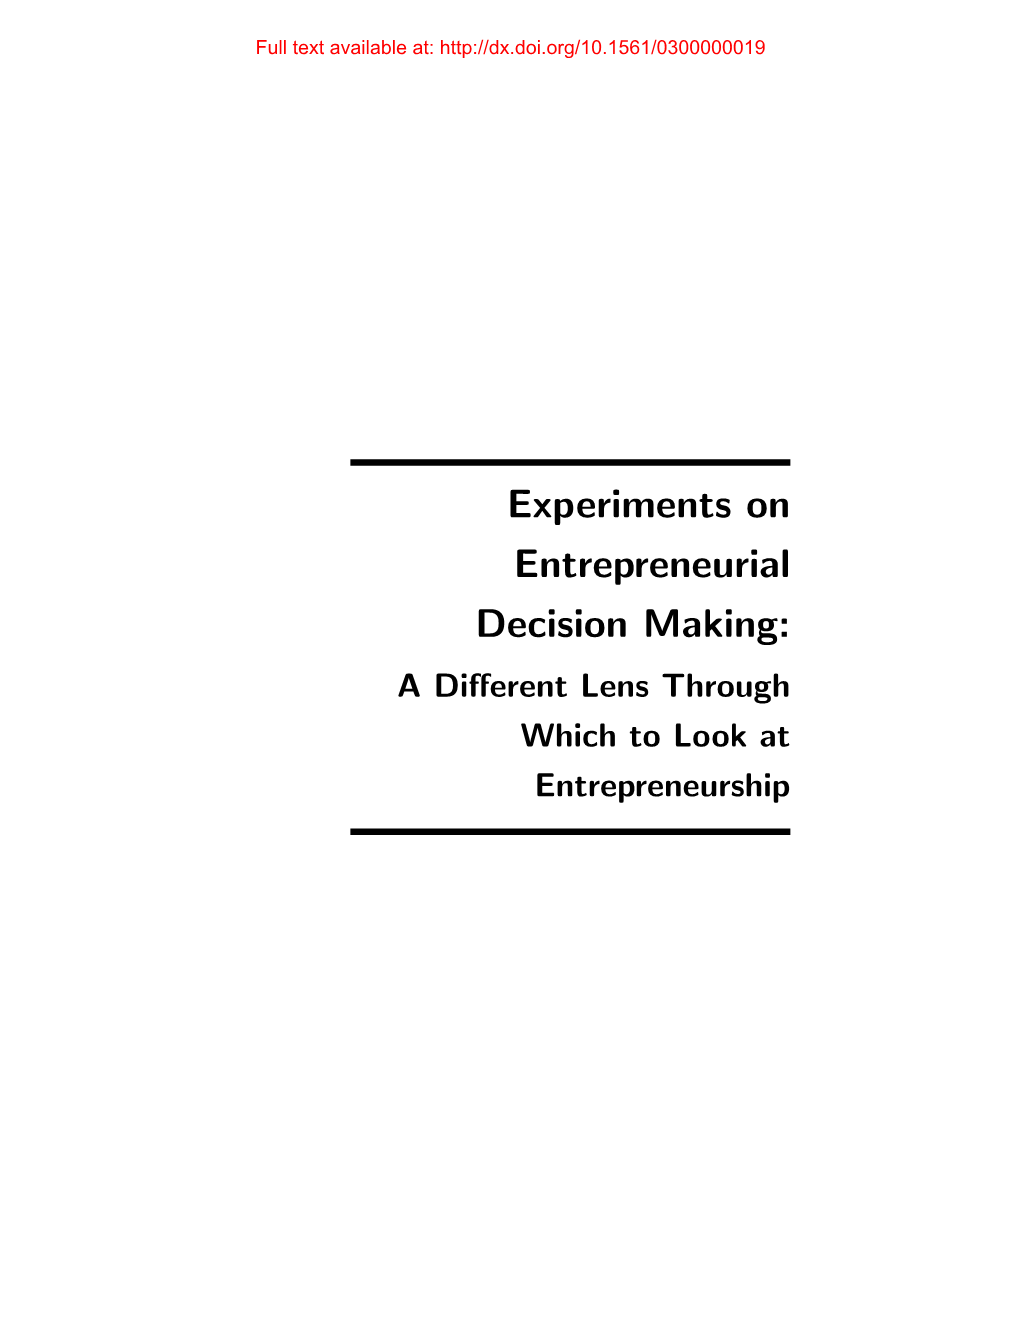 Experiments on Entrepreneurial Decision Making: a Diﬀerent Lens Through Which to Look at Entrepreneurship Full Text Available At